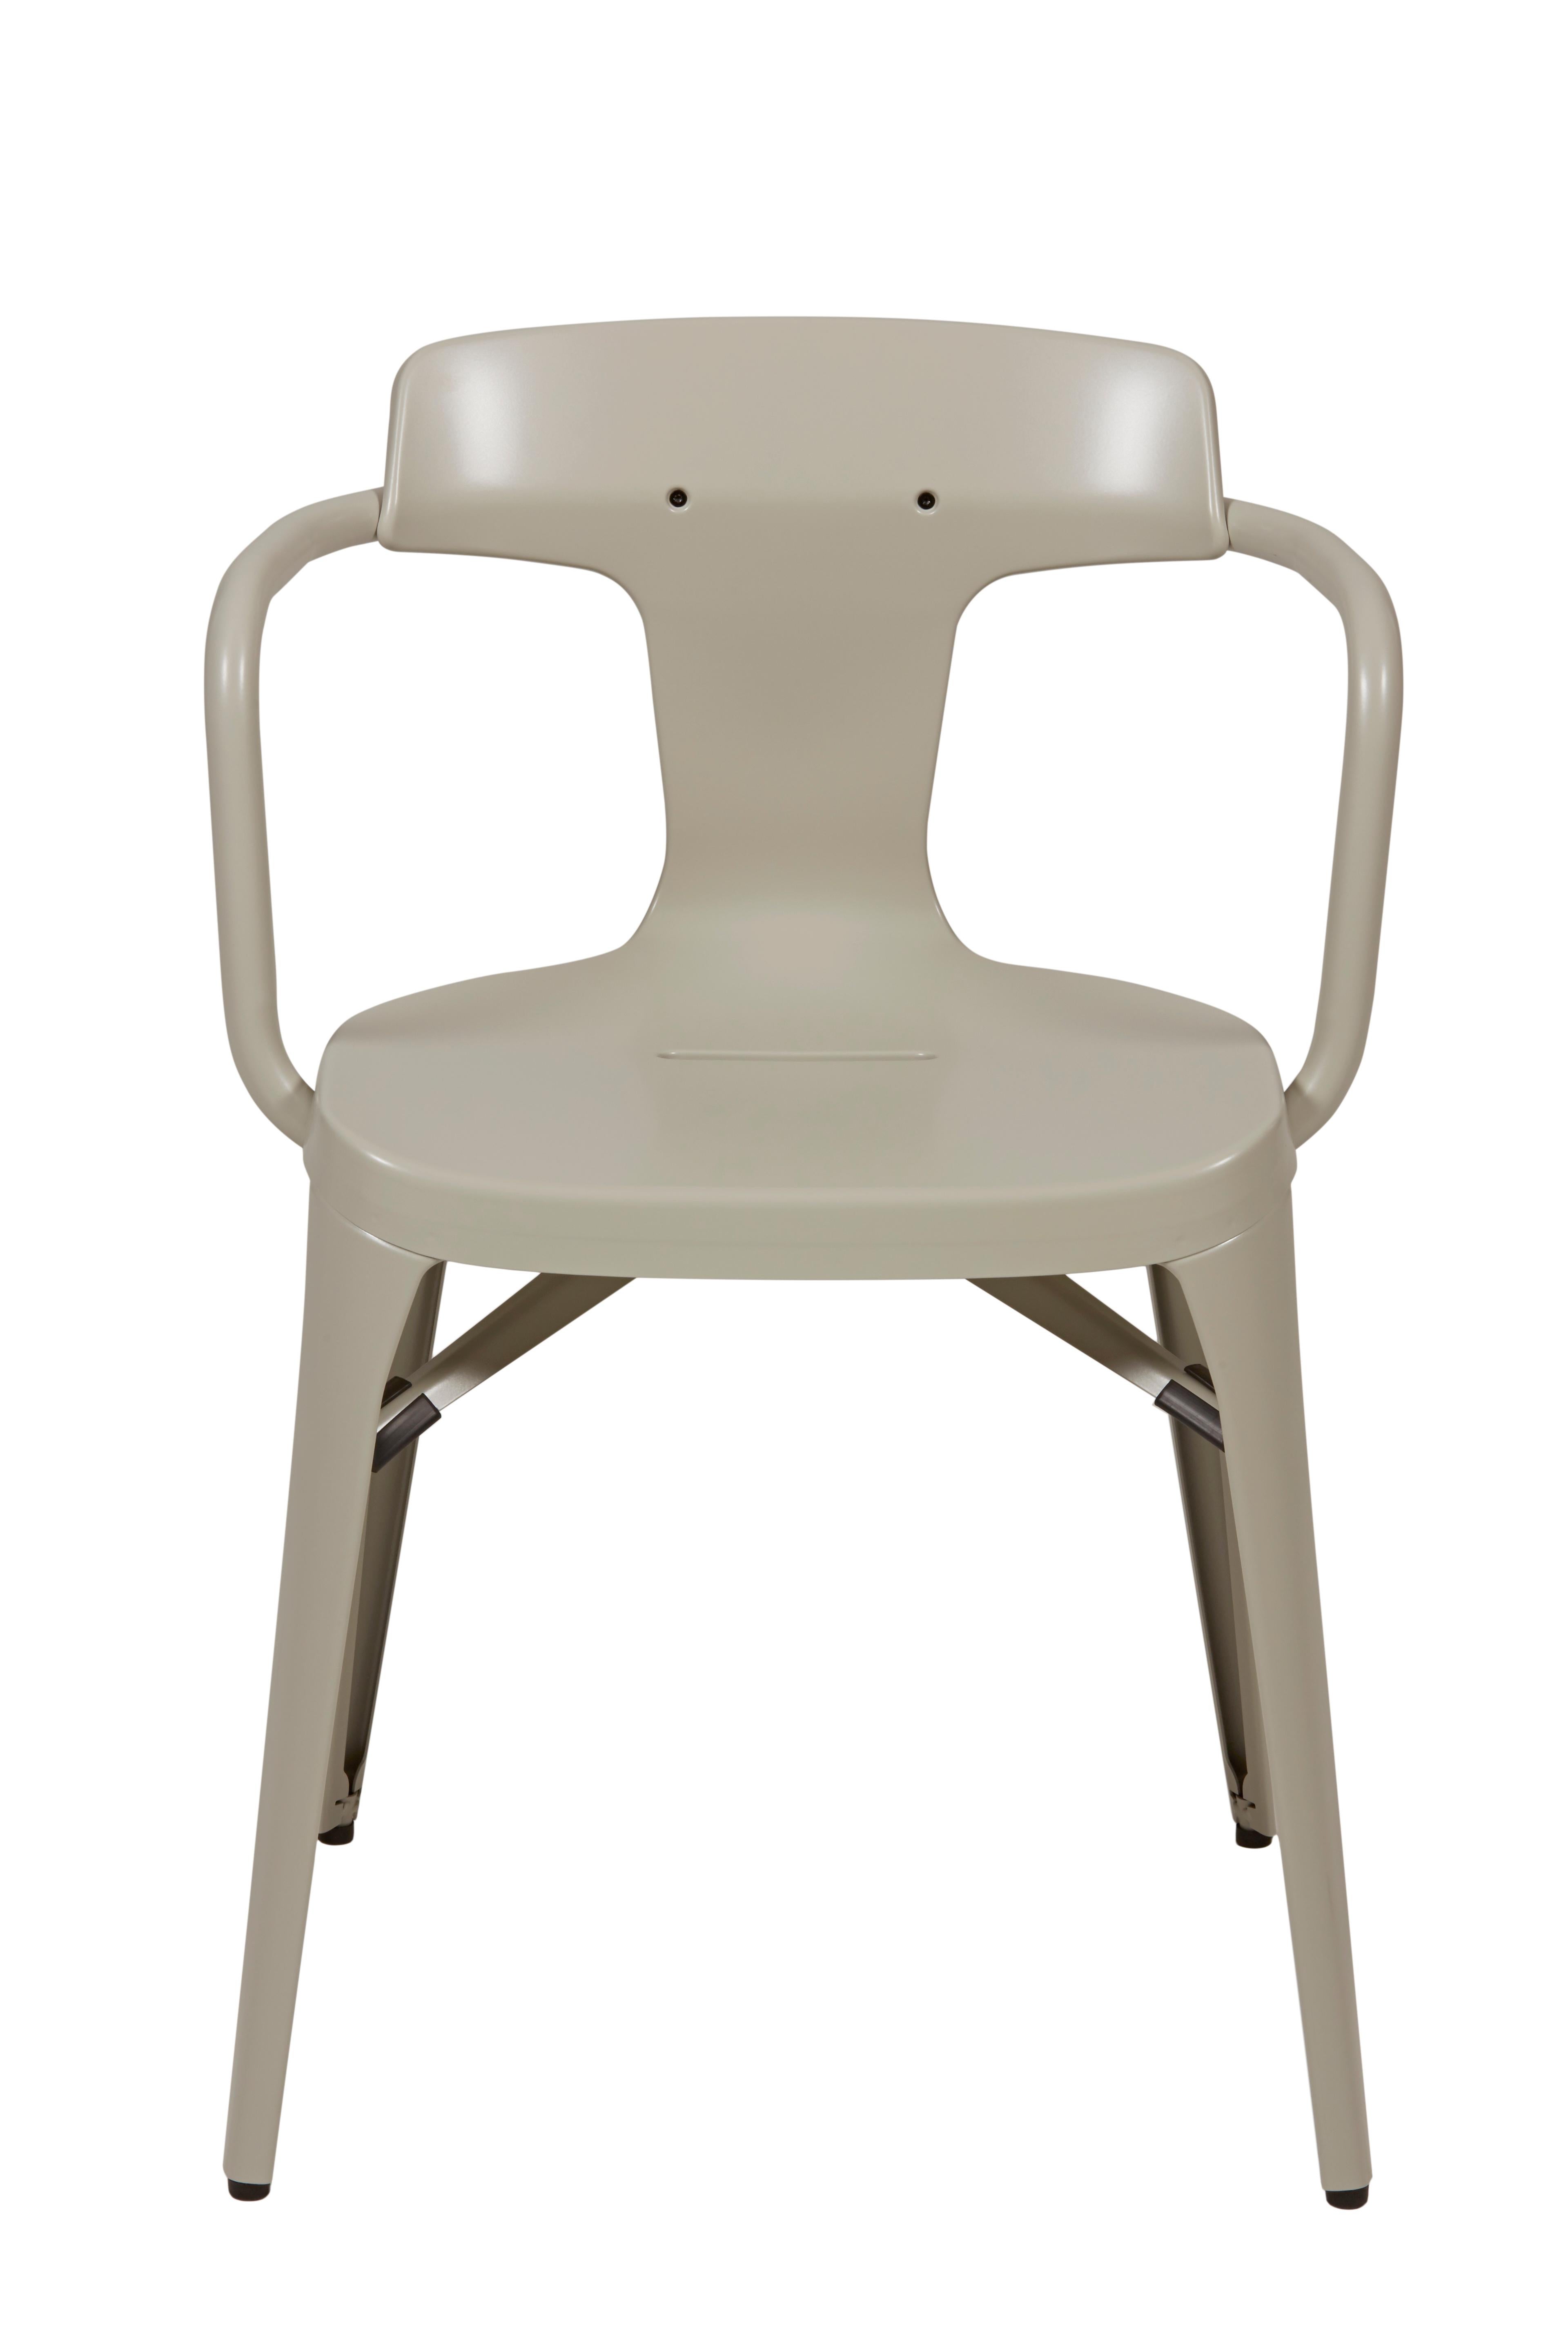 Im Angebot: T14 Chair in Pop Colors by Patrick Norguet and Tolix, Beige (Gris Soie)